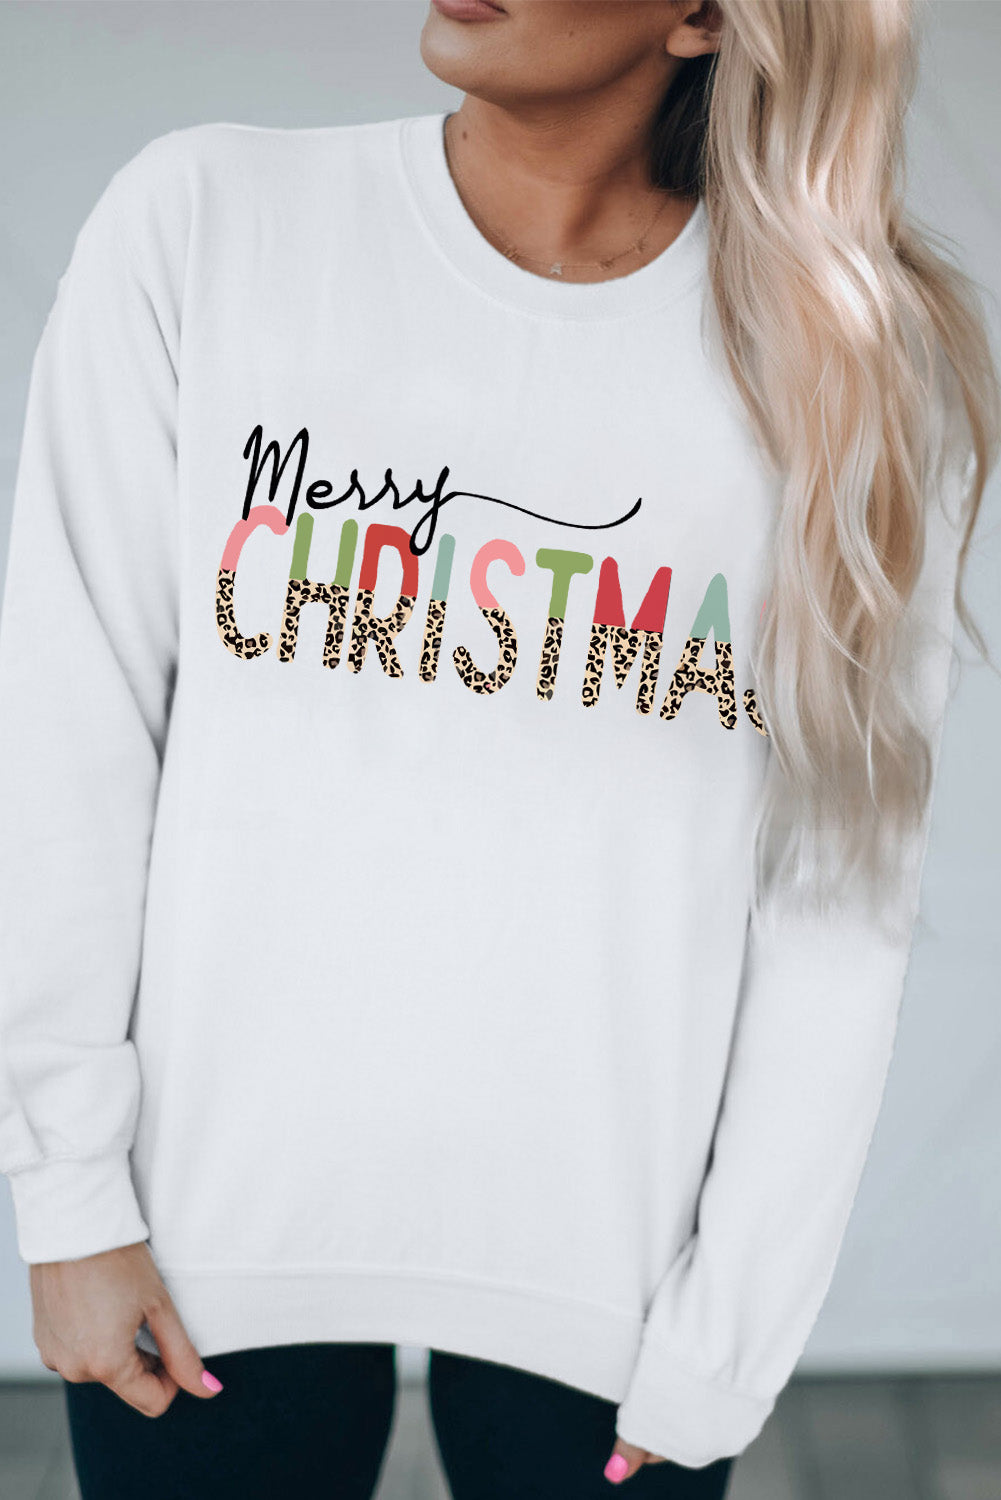 LC25313583-1-S, LC25313583-1-M, LC25313583-1-L, LC25313583-1-XL, LC25313583-1-2XL, White Merry Christmas Sweatshirt Women Leopar Holiday Pullover Tops